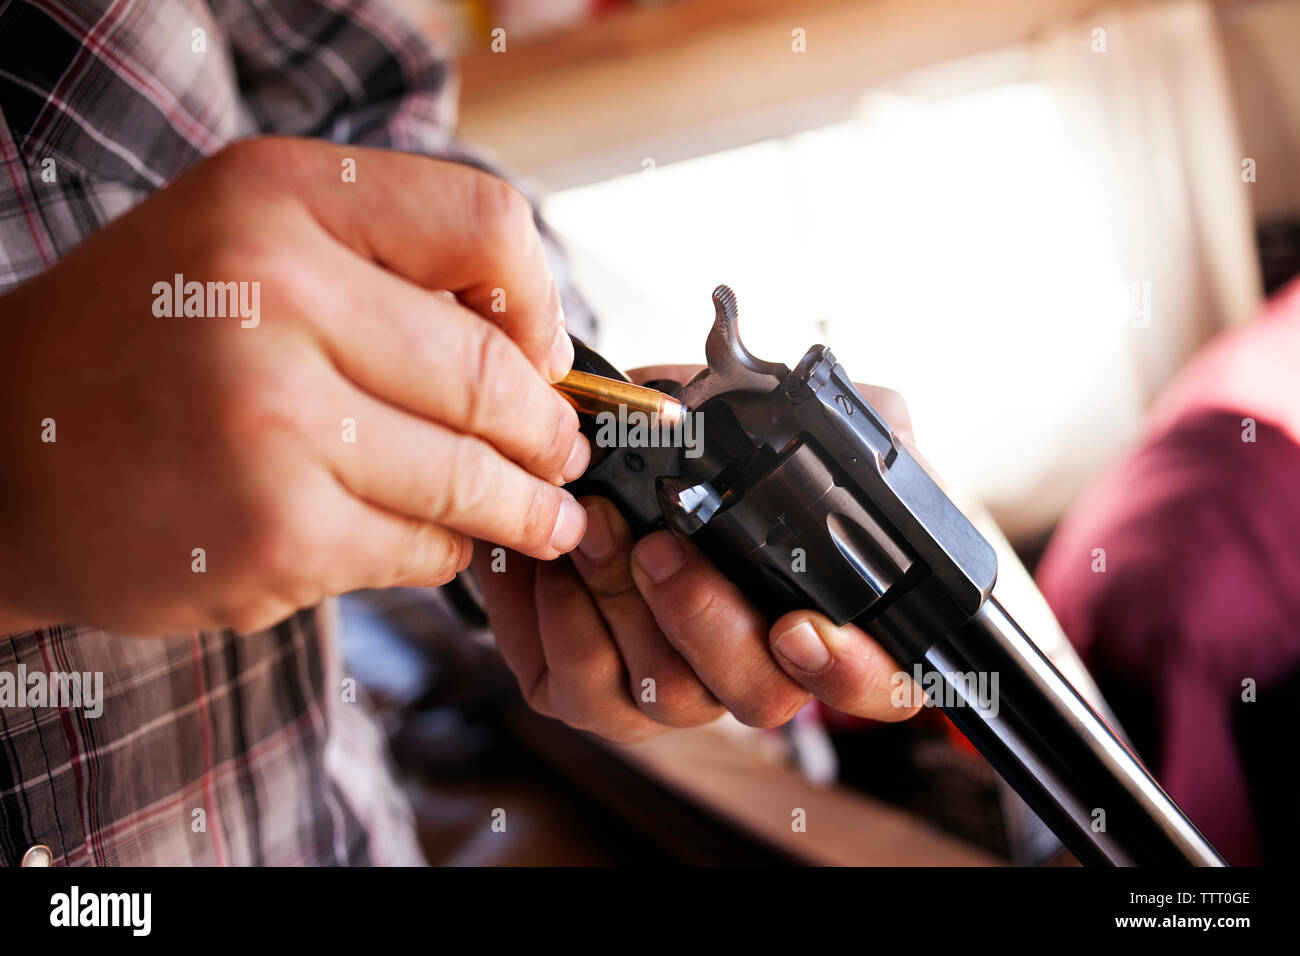 Close-up of man's hands loading revolver Stock Photo